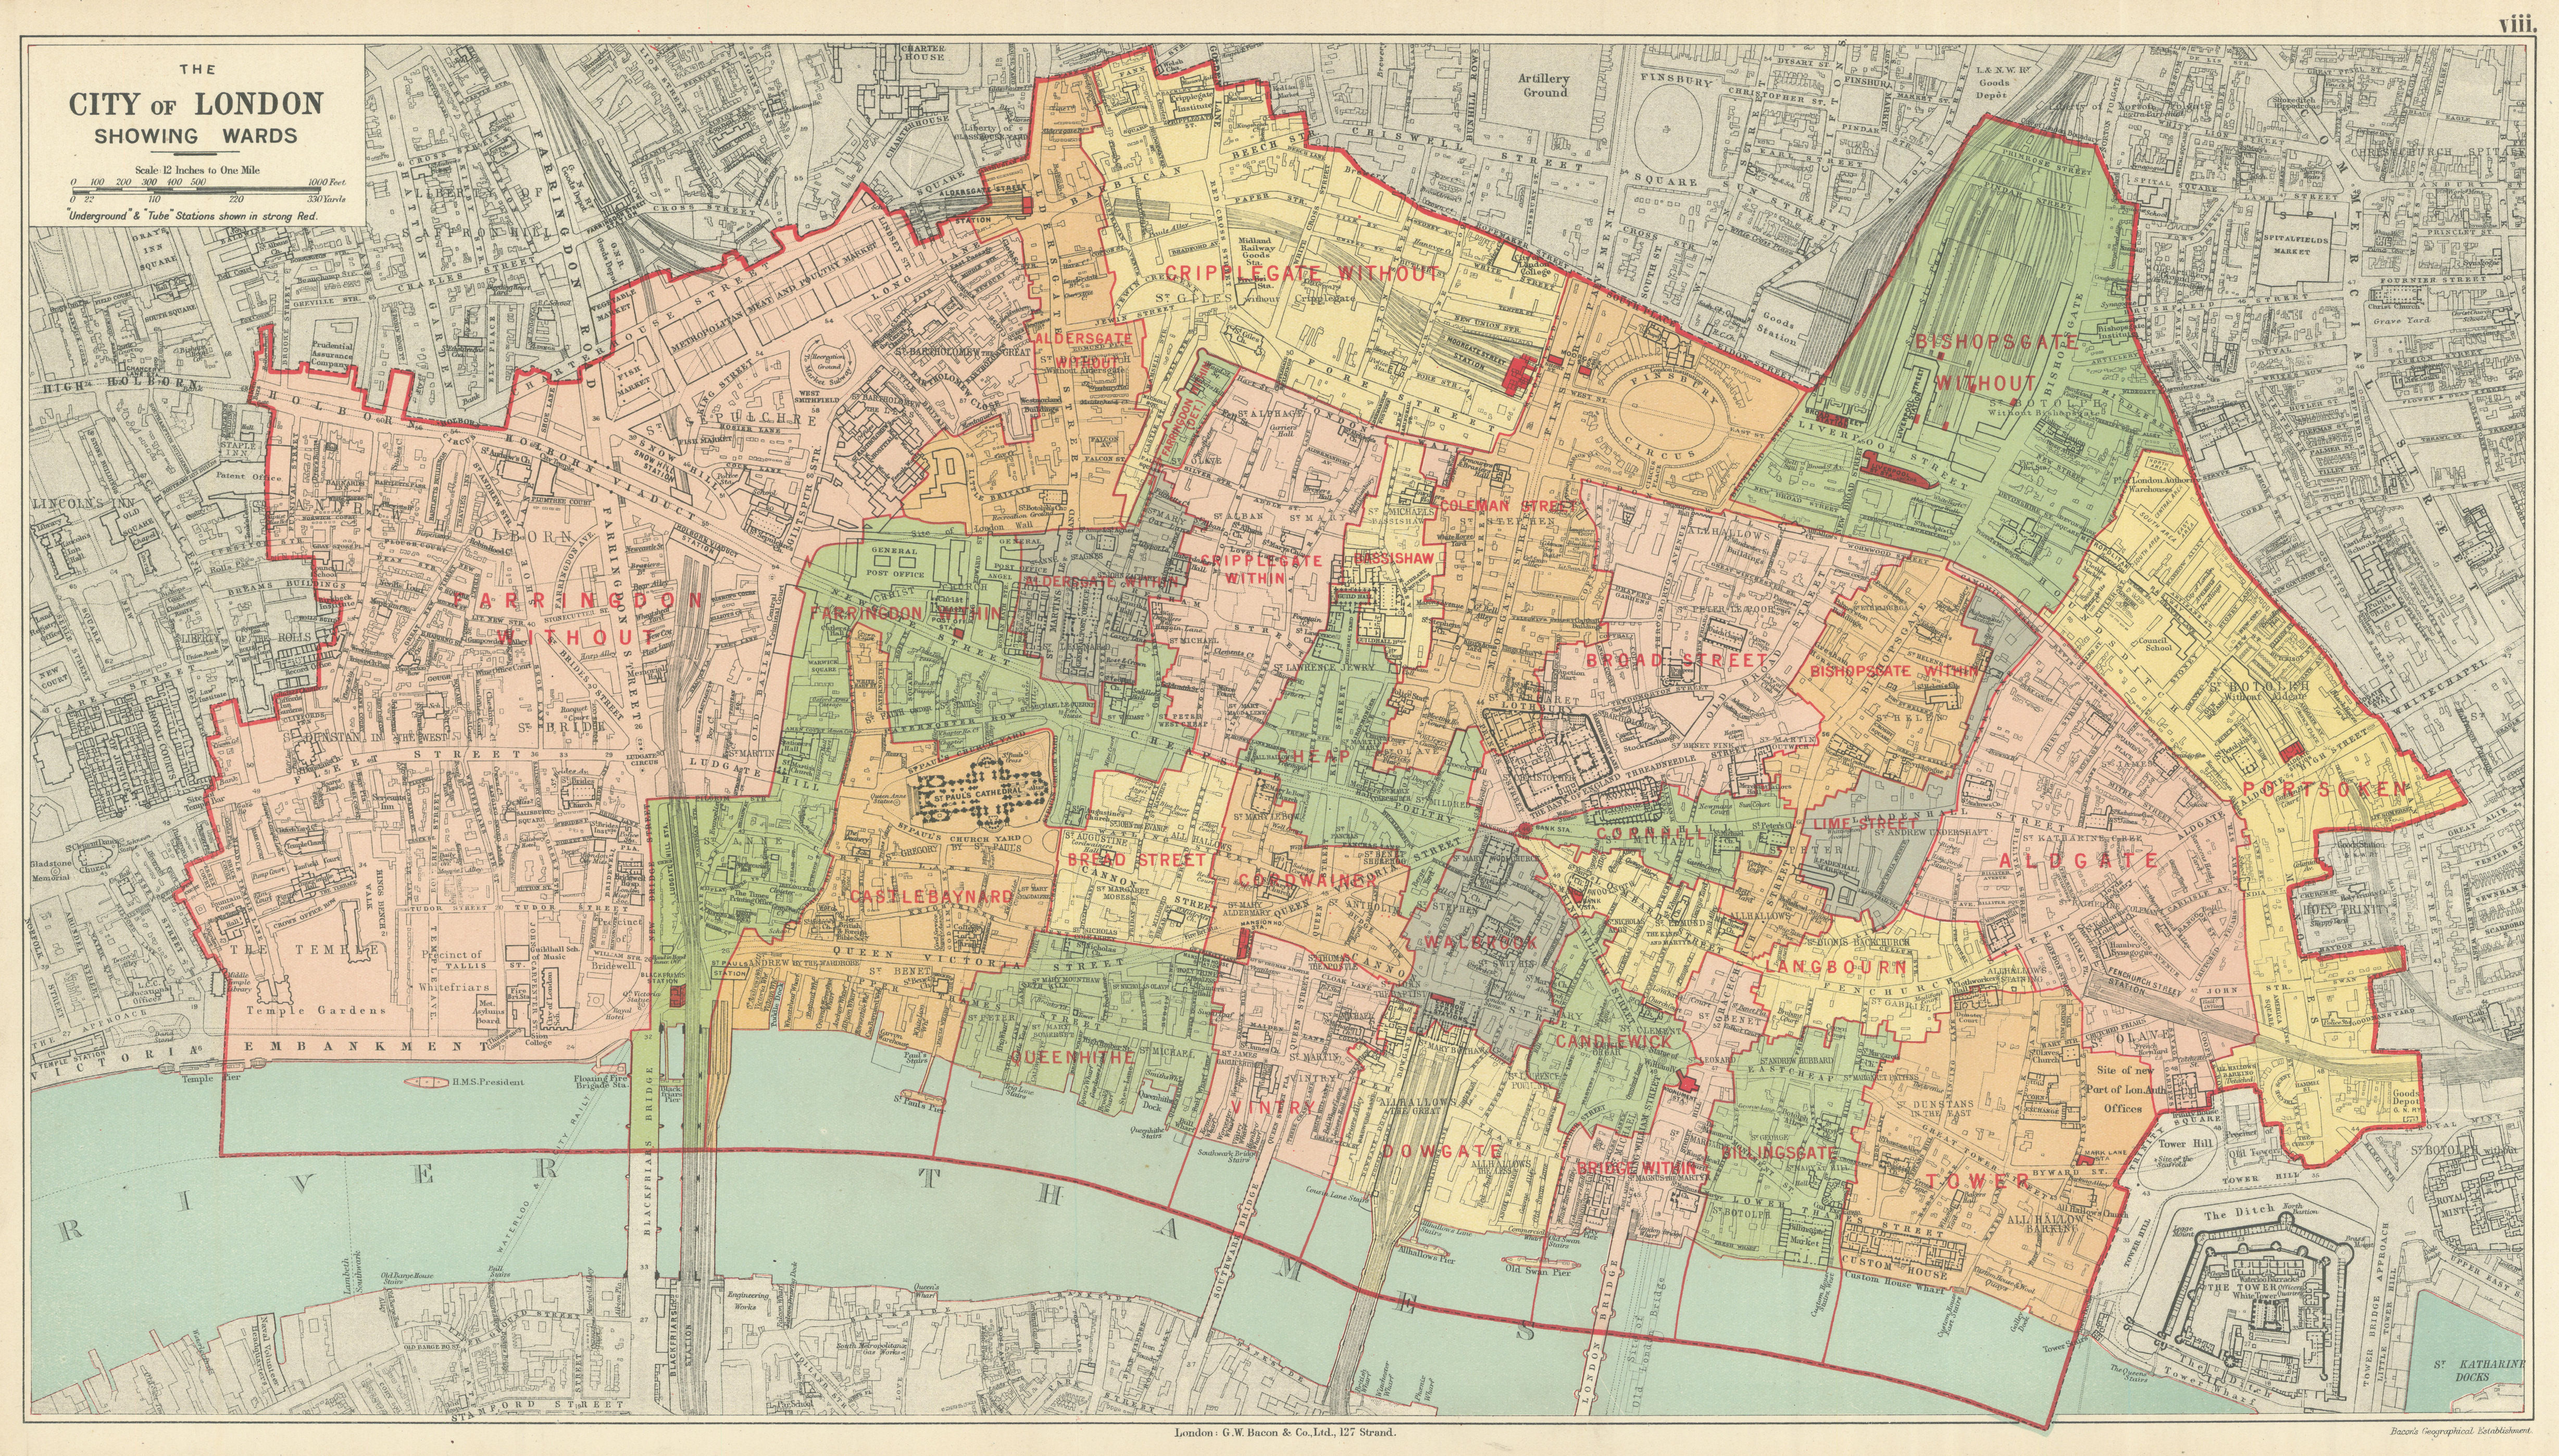 Associate Product CITY OF LONDON showing WARDS. Churches & public buildings plans. BACON 1919 map